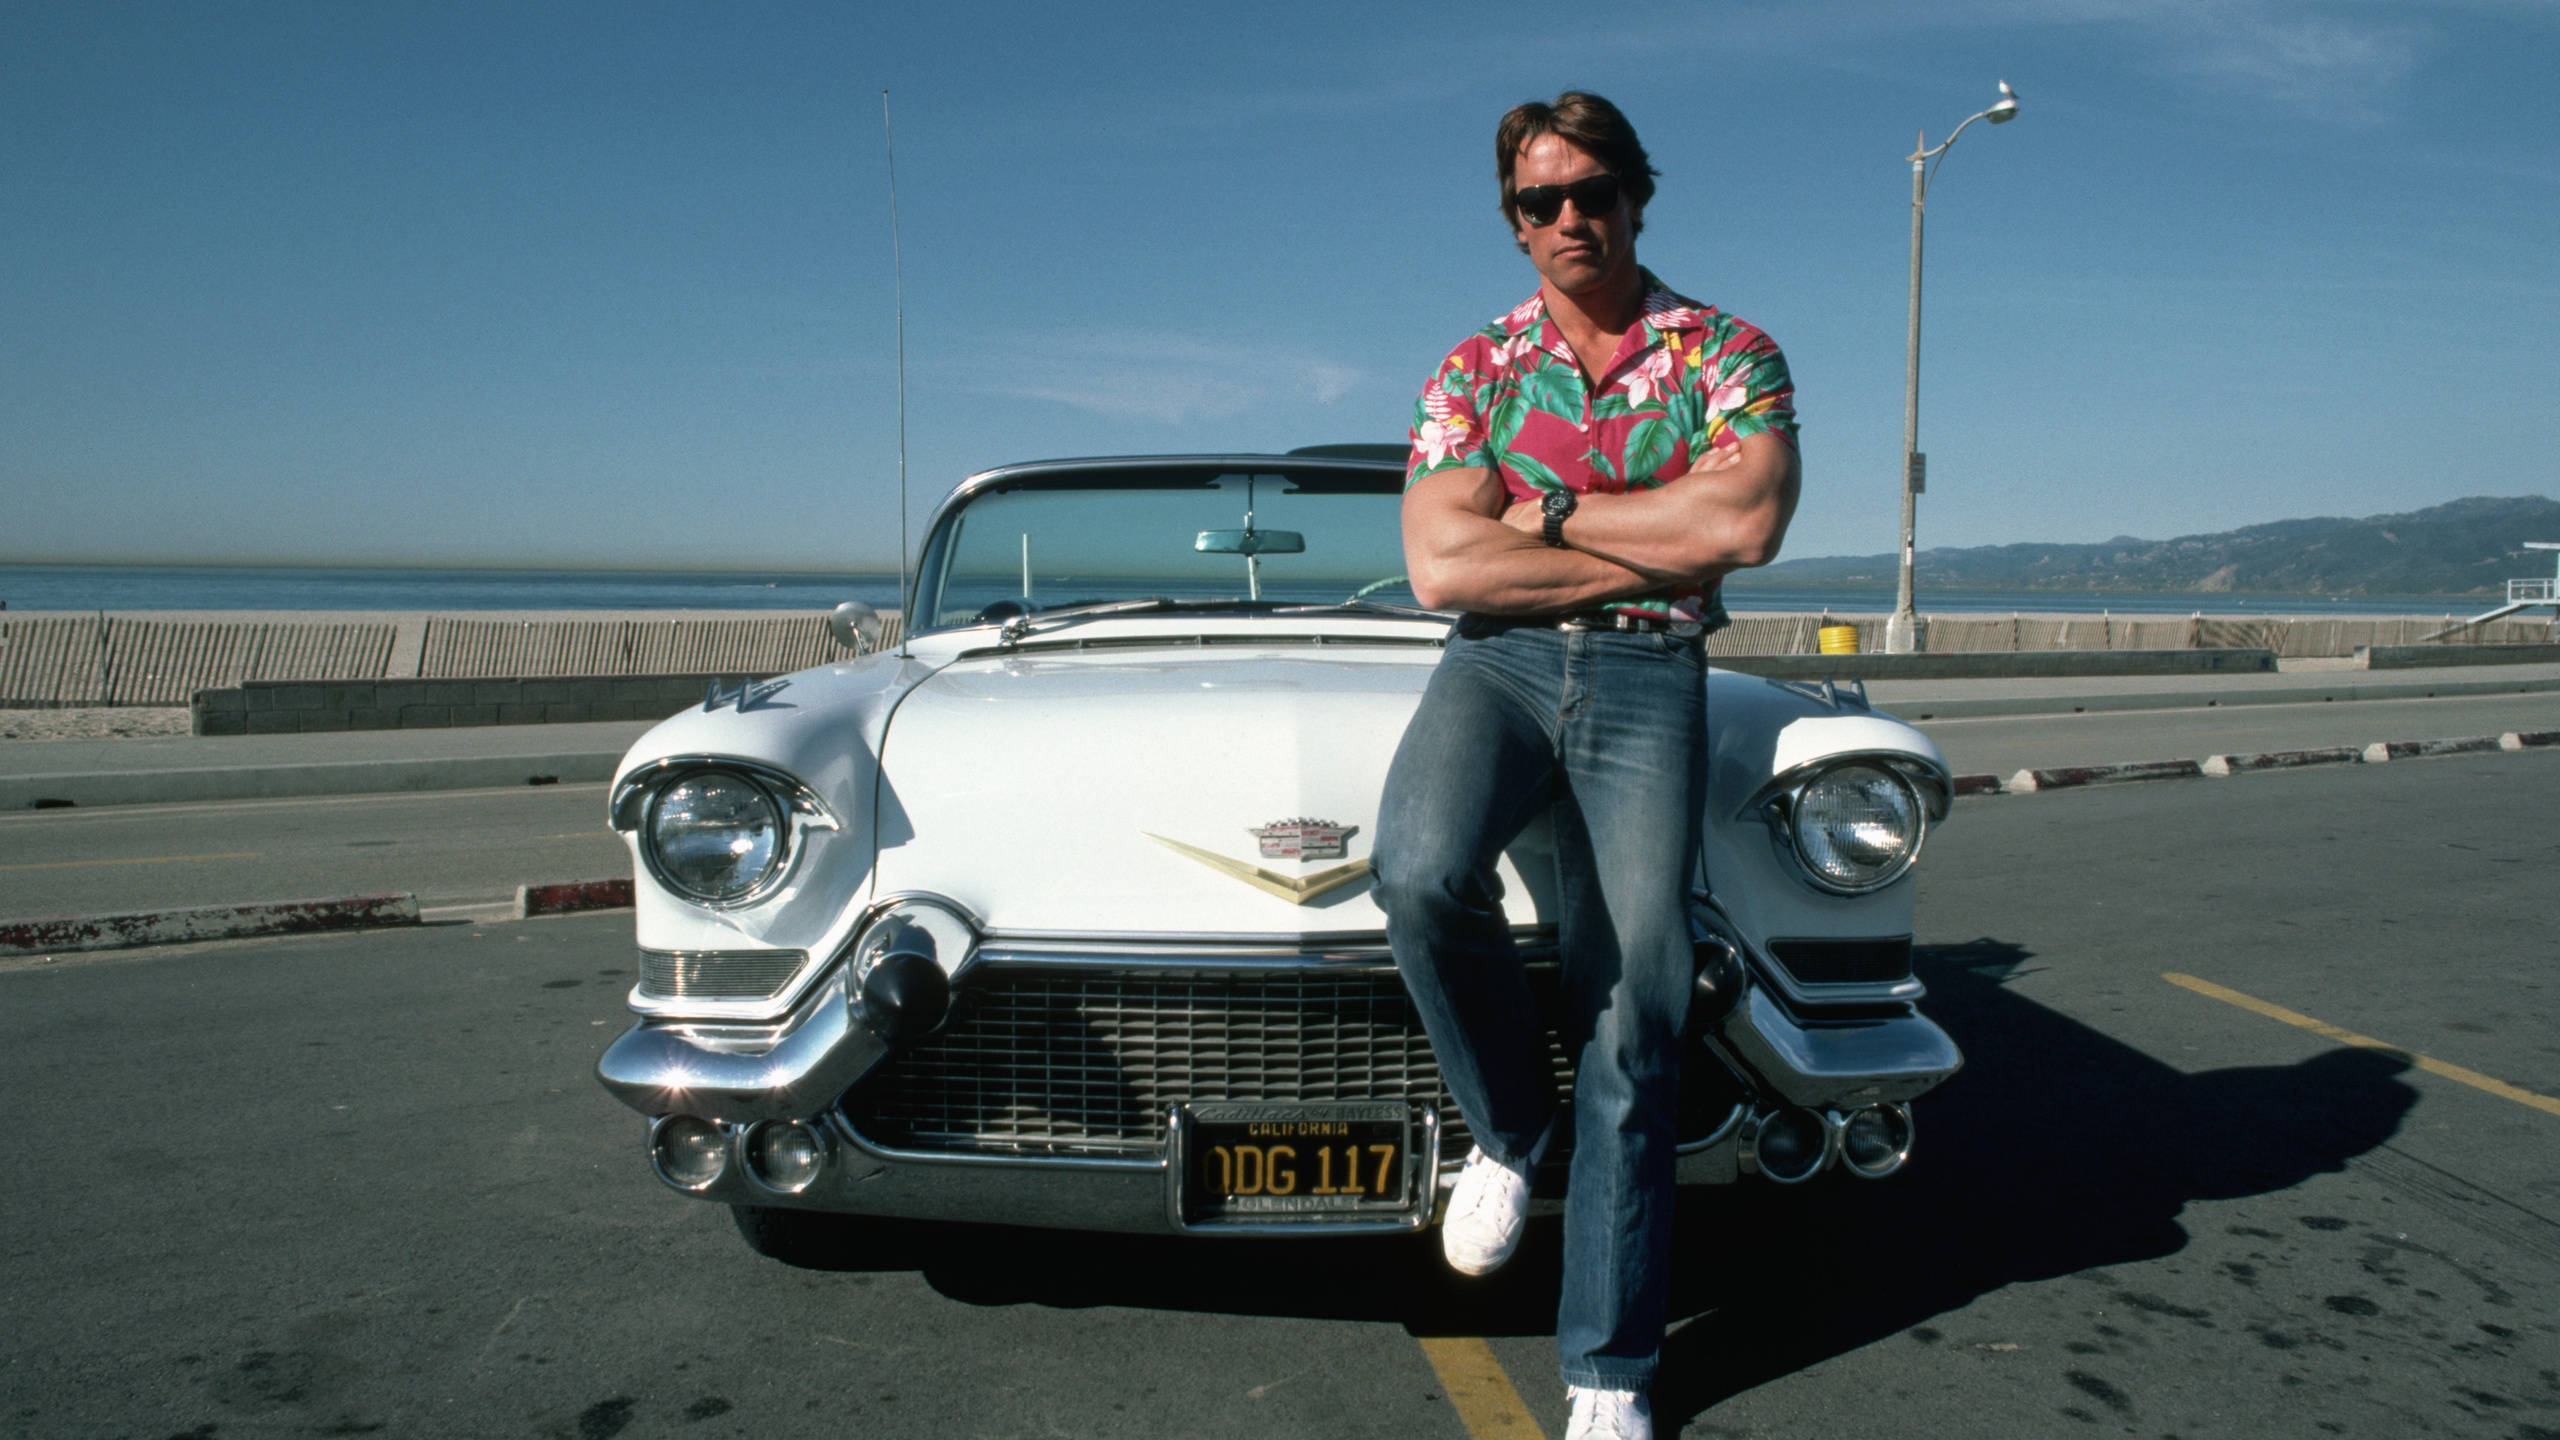 Cadillac and Arnold Schwarzenegger for 2560x1440 HDTV resolution